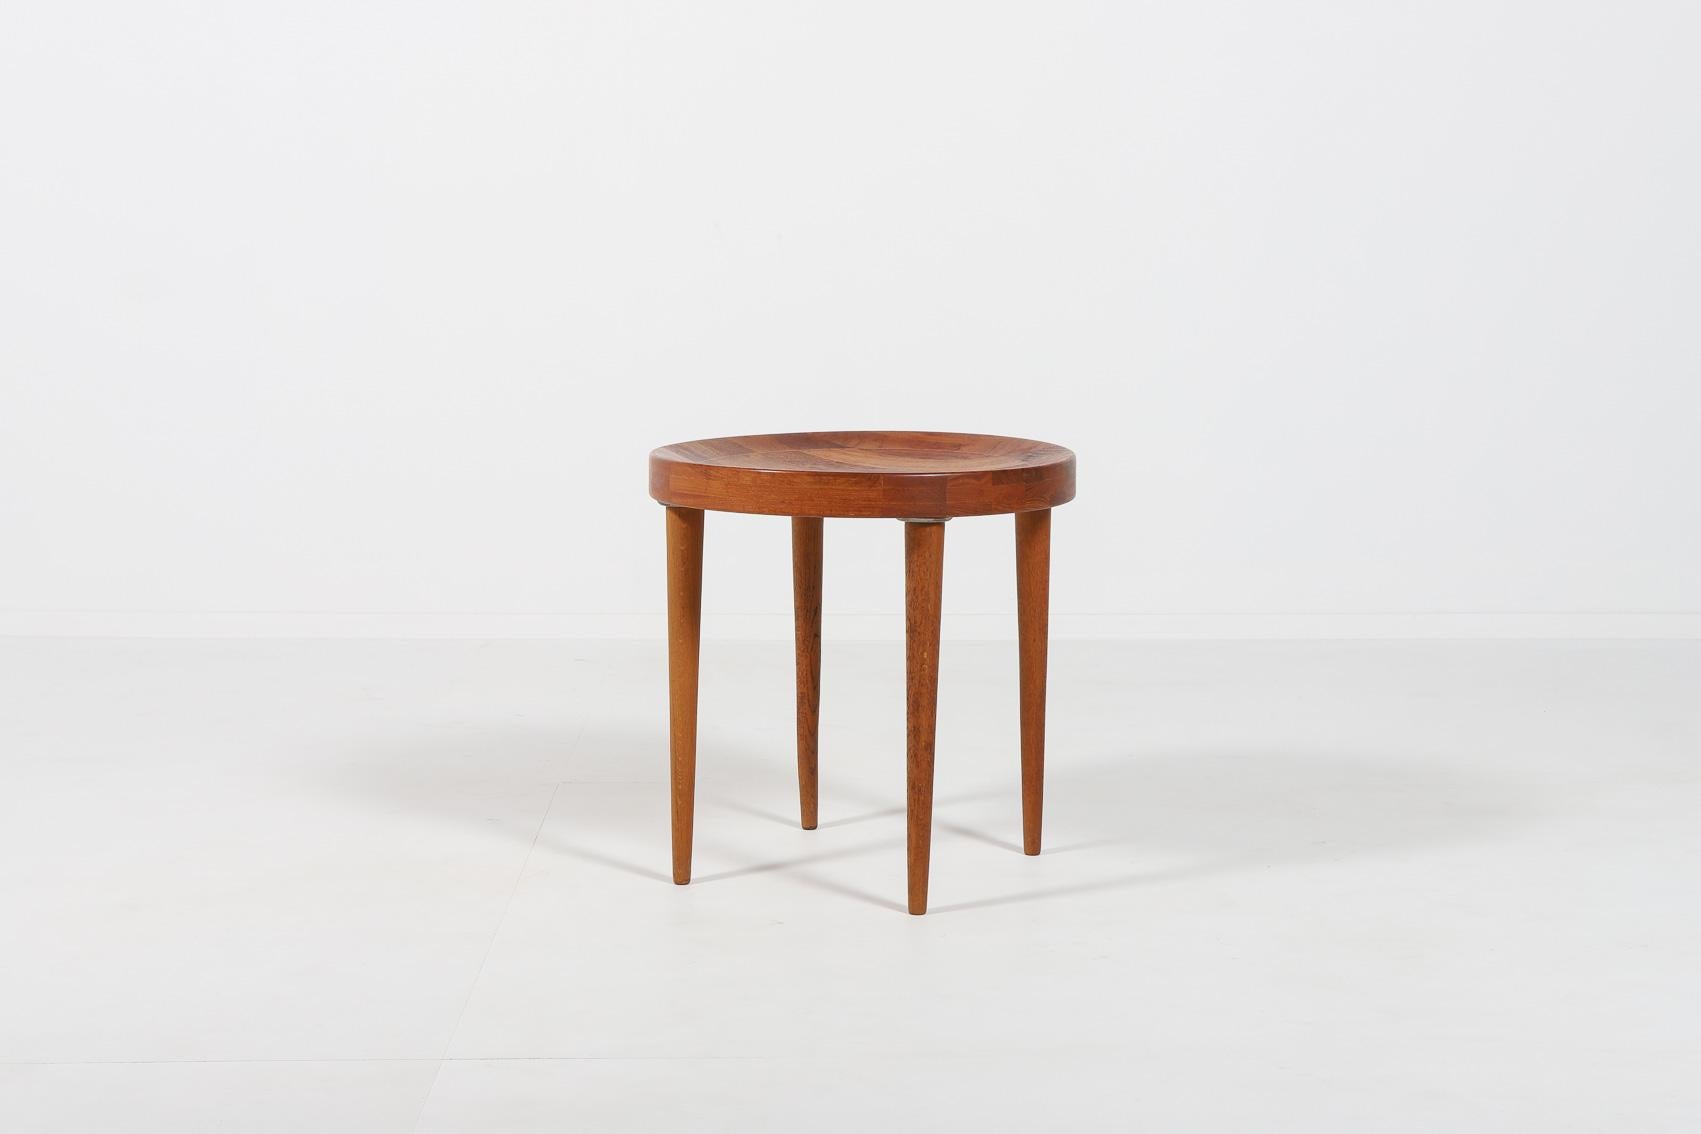 Teak and oak combination side table / fruit bowl by Jens Harald Quistgaard, produced in 1950’s by Nissen in Denmark.

Condition
Good

Dimensions
diameter: 50 cm
height: 50 cm